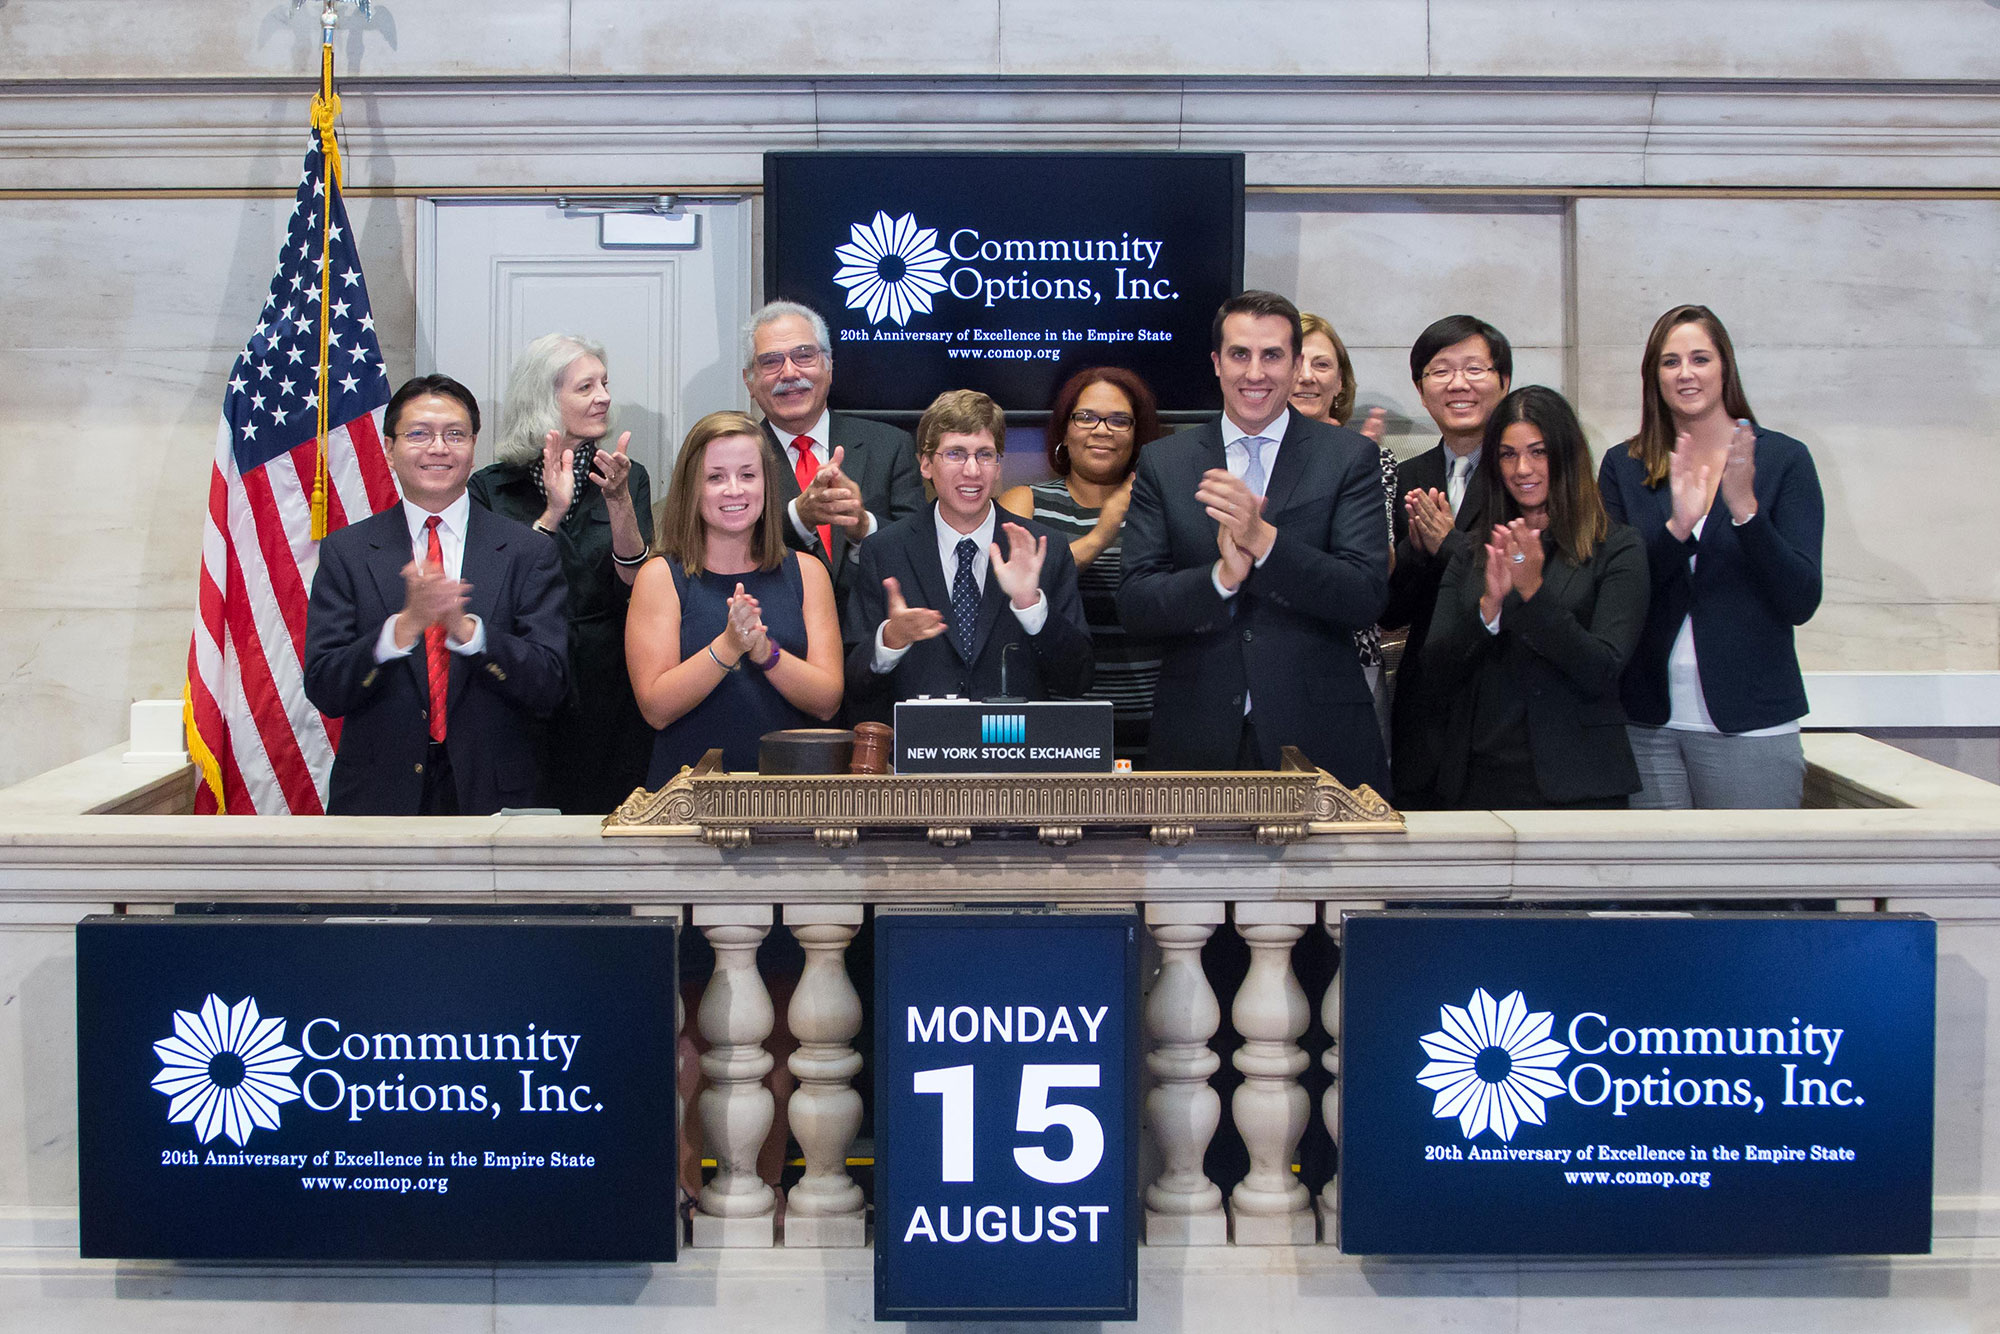 Officials and guests of Community Options, Inc. visit the New York Stock Exchange. Max Depelteau (5th from left), an individual served by Community Options, Inc., rings the NYSE Closing Bell® to highlight their 20th Anniversary of providing services throughout NY State. Photo Credit: NYSE